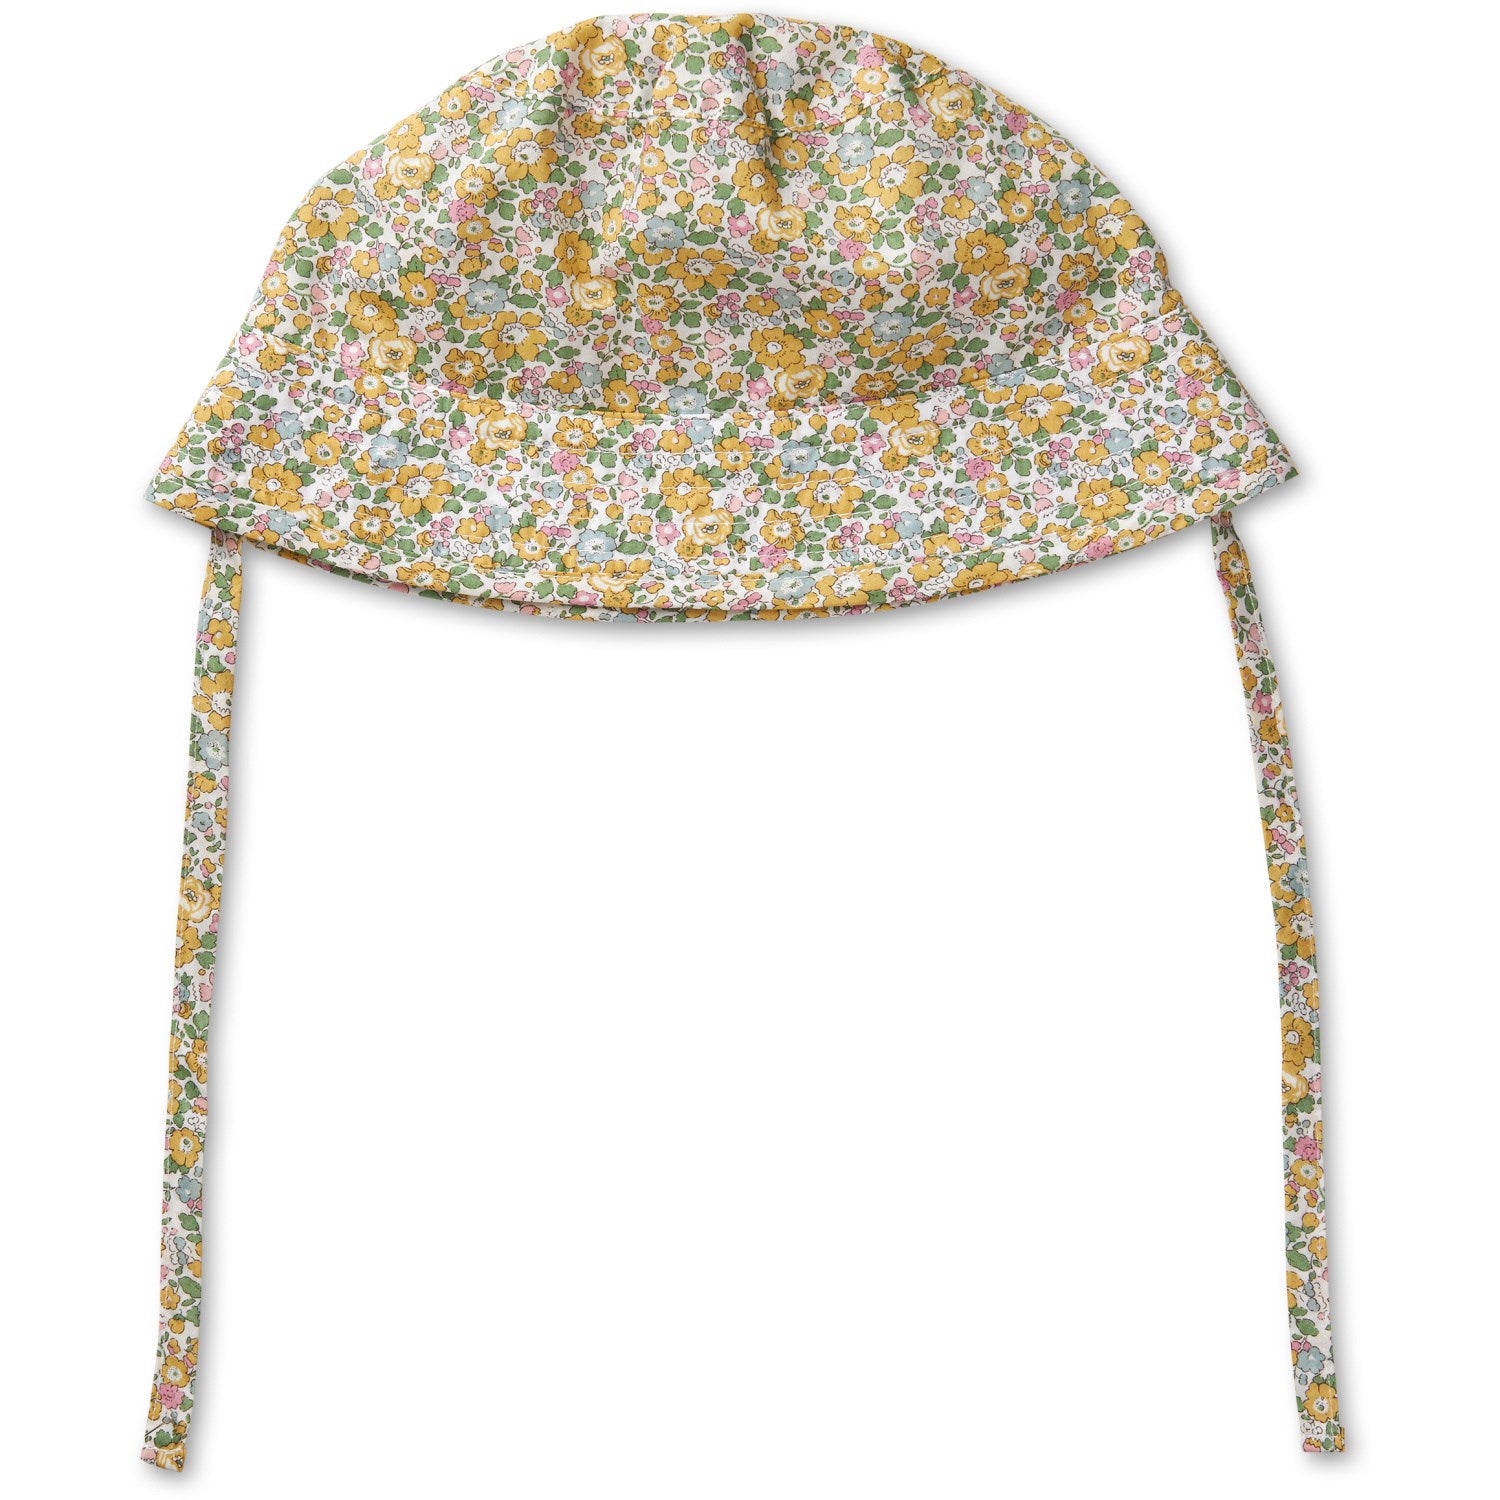 Lalaby Betsy Ann Loui Baby Sun Hat